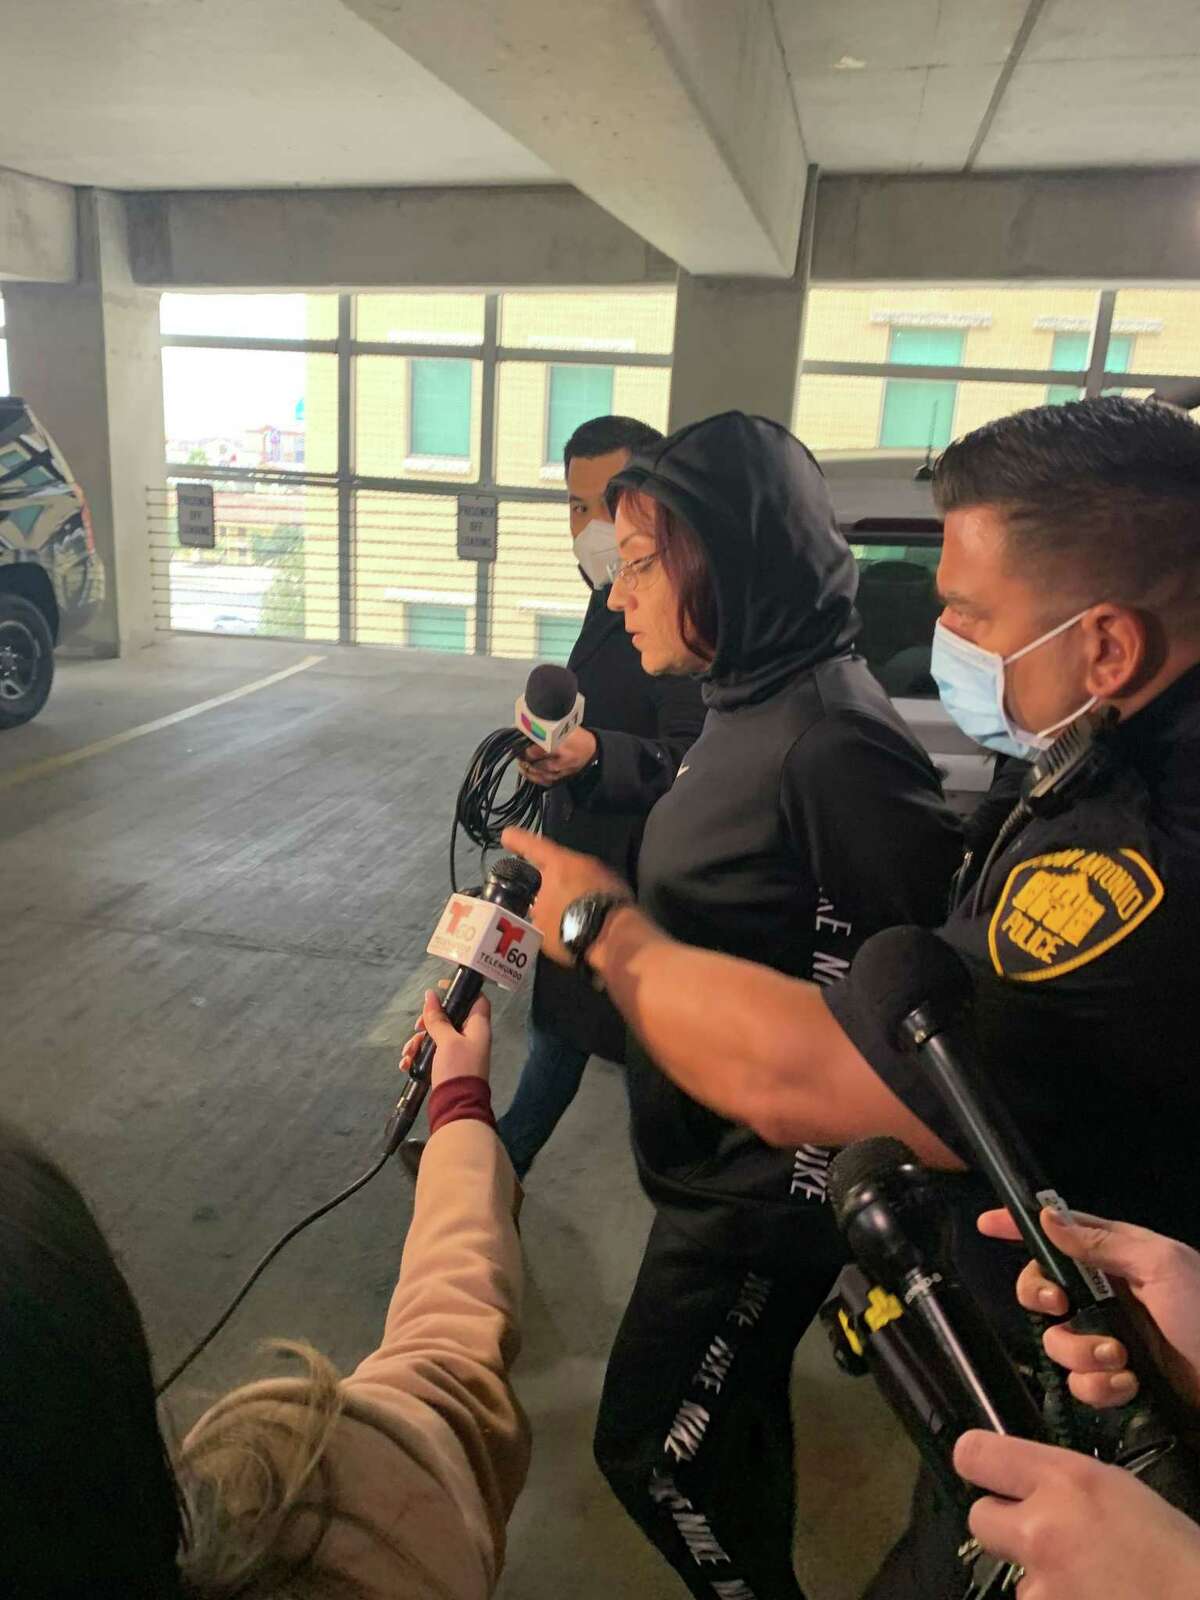 Priscilla Ann Salias, 37, is peppered with questions from reporters as San Antonio police lead her out. Salinas was arrested on two counts of child endangerment on Tuesday, Jan. 11, 2022. She is accused of leaving two toddlers alone and tied up in a Southeast Side home in San Antonio.